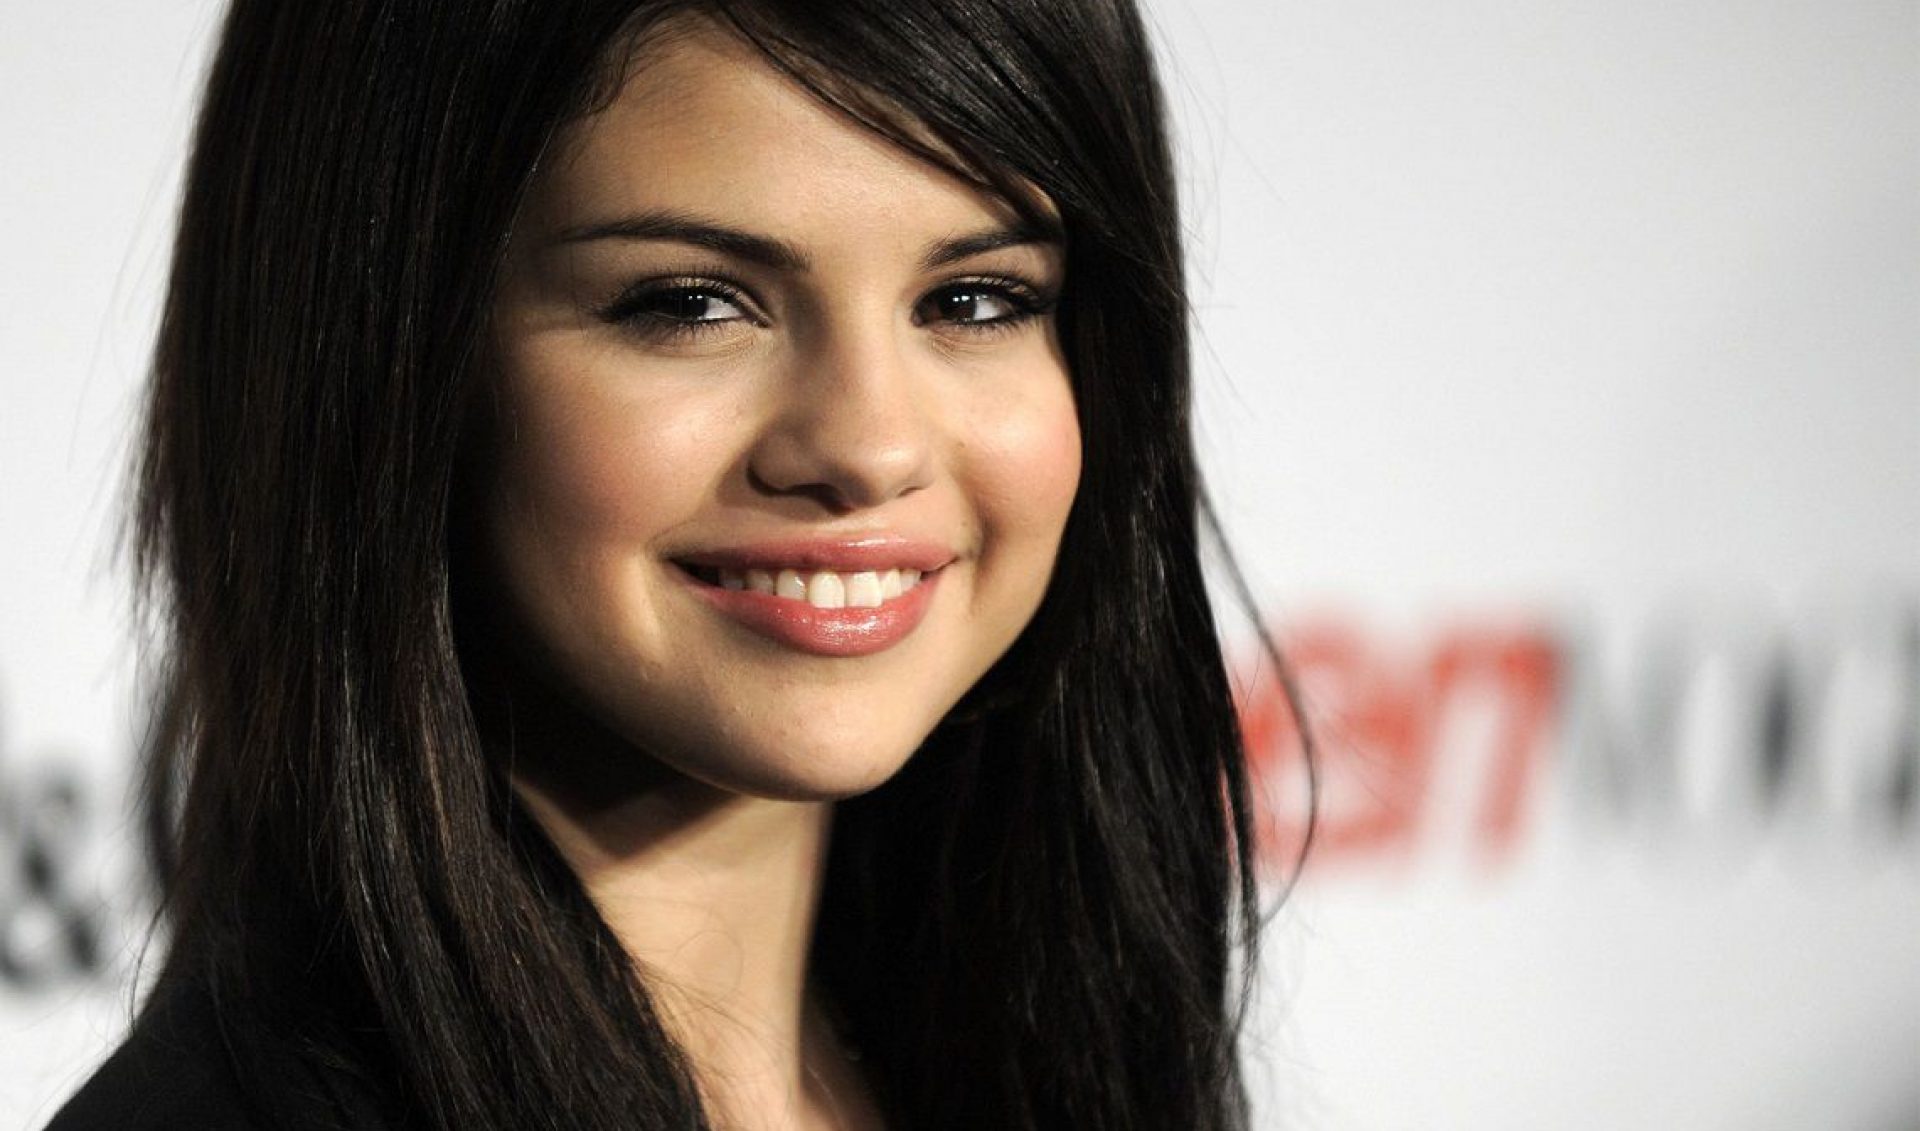 Netflix Orders Series Adaptation Of ’13 Reasons Why’ With Selena Gomez As Executive Producer